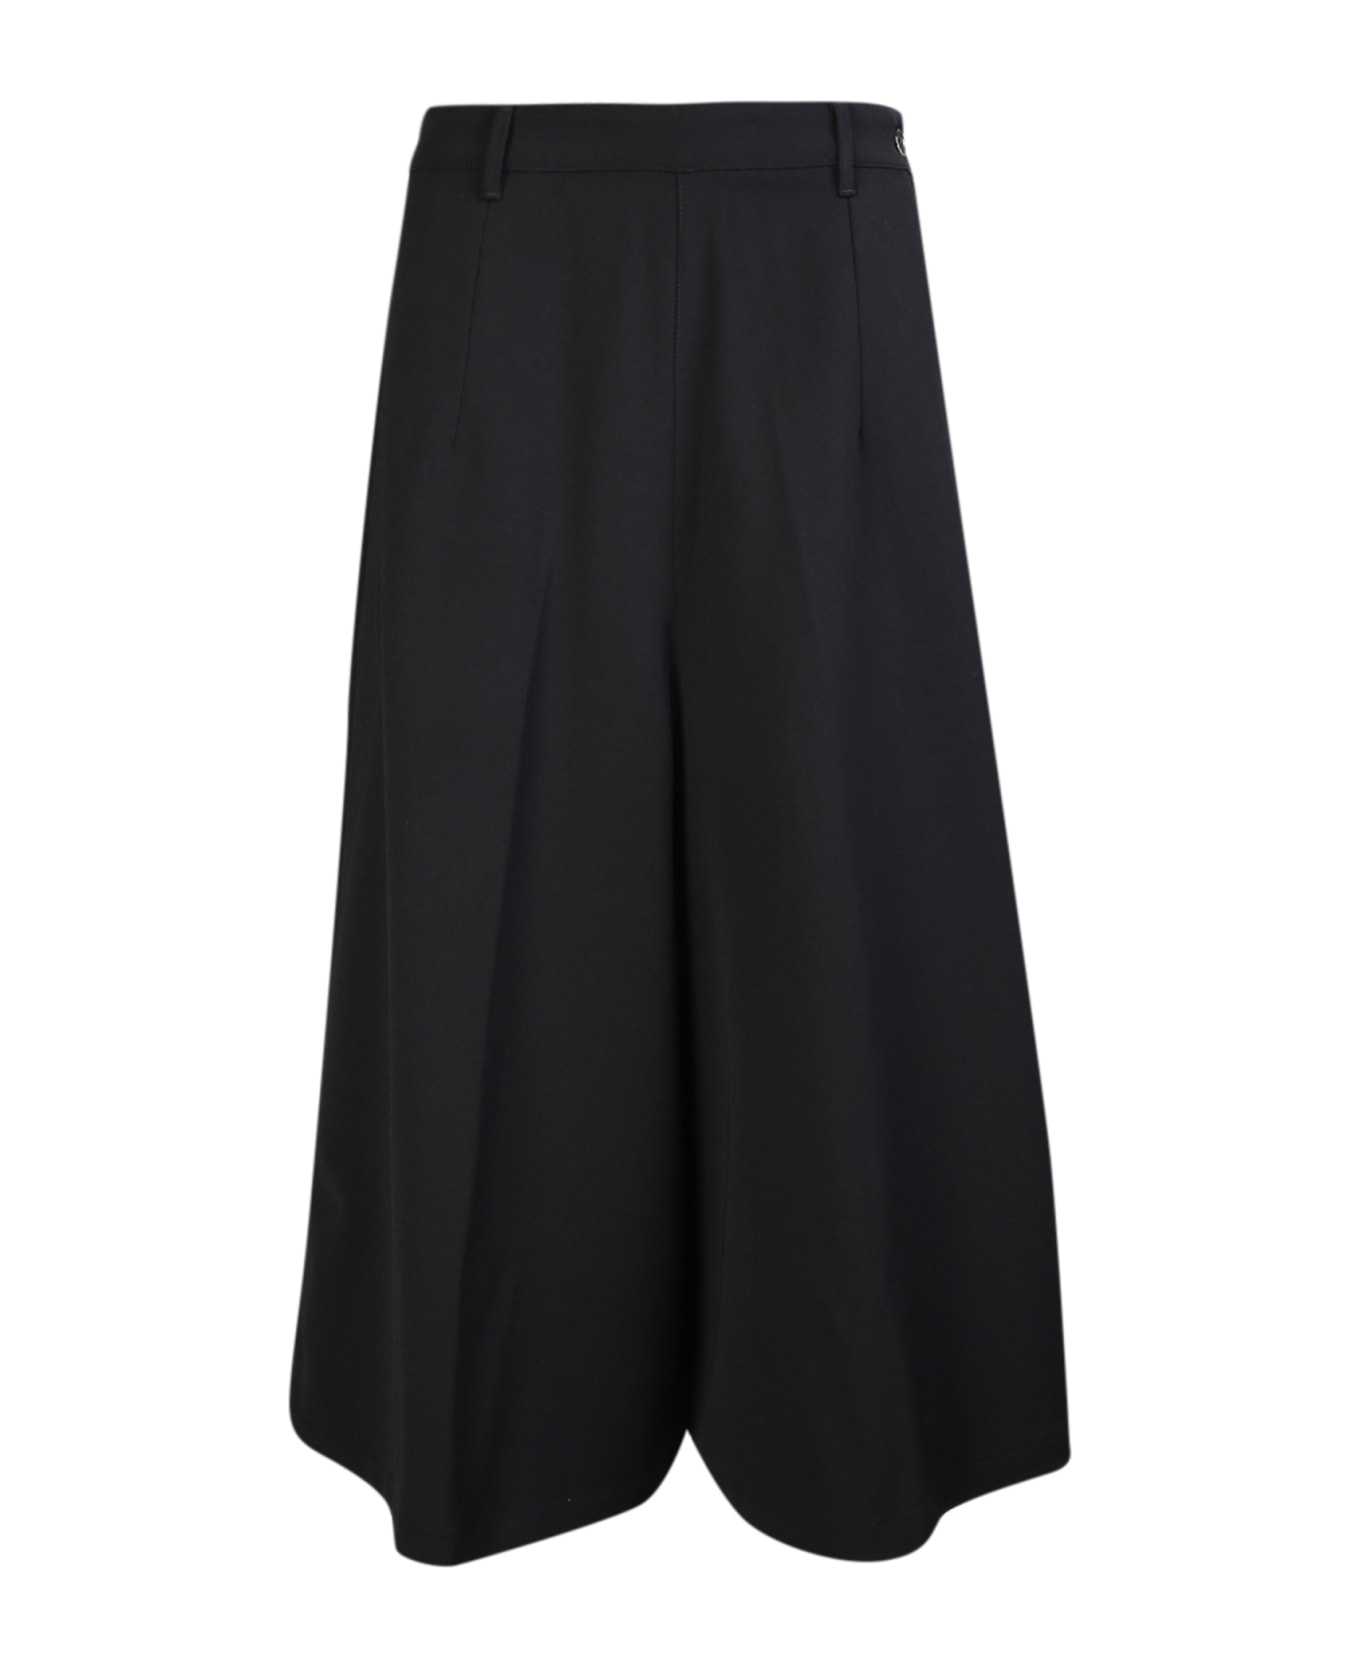 Nine in the Morning Black Cady Culotte Trousers - Black